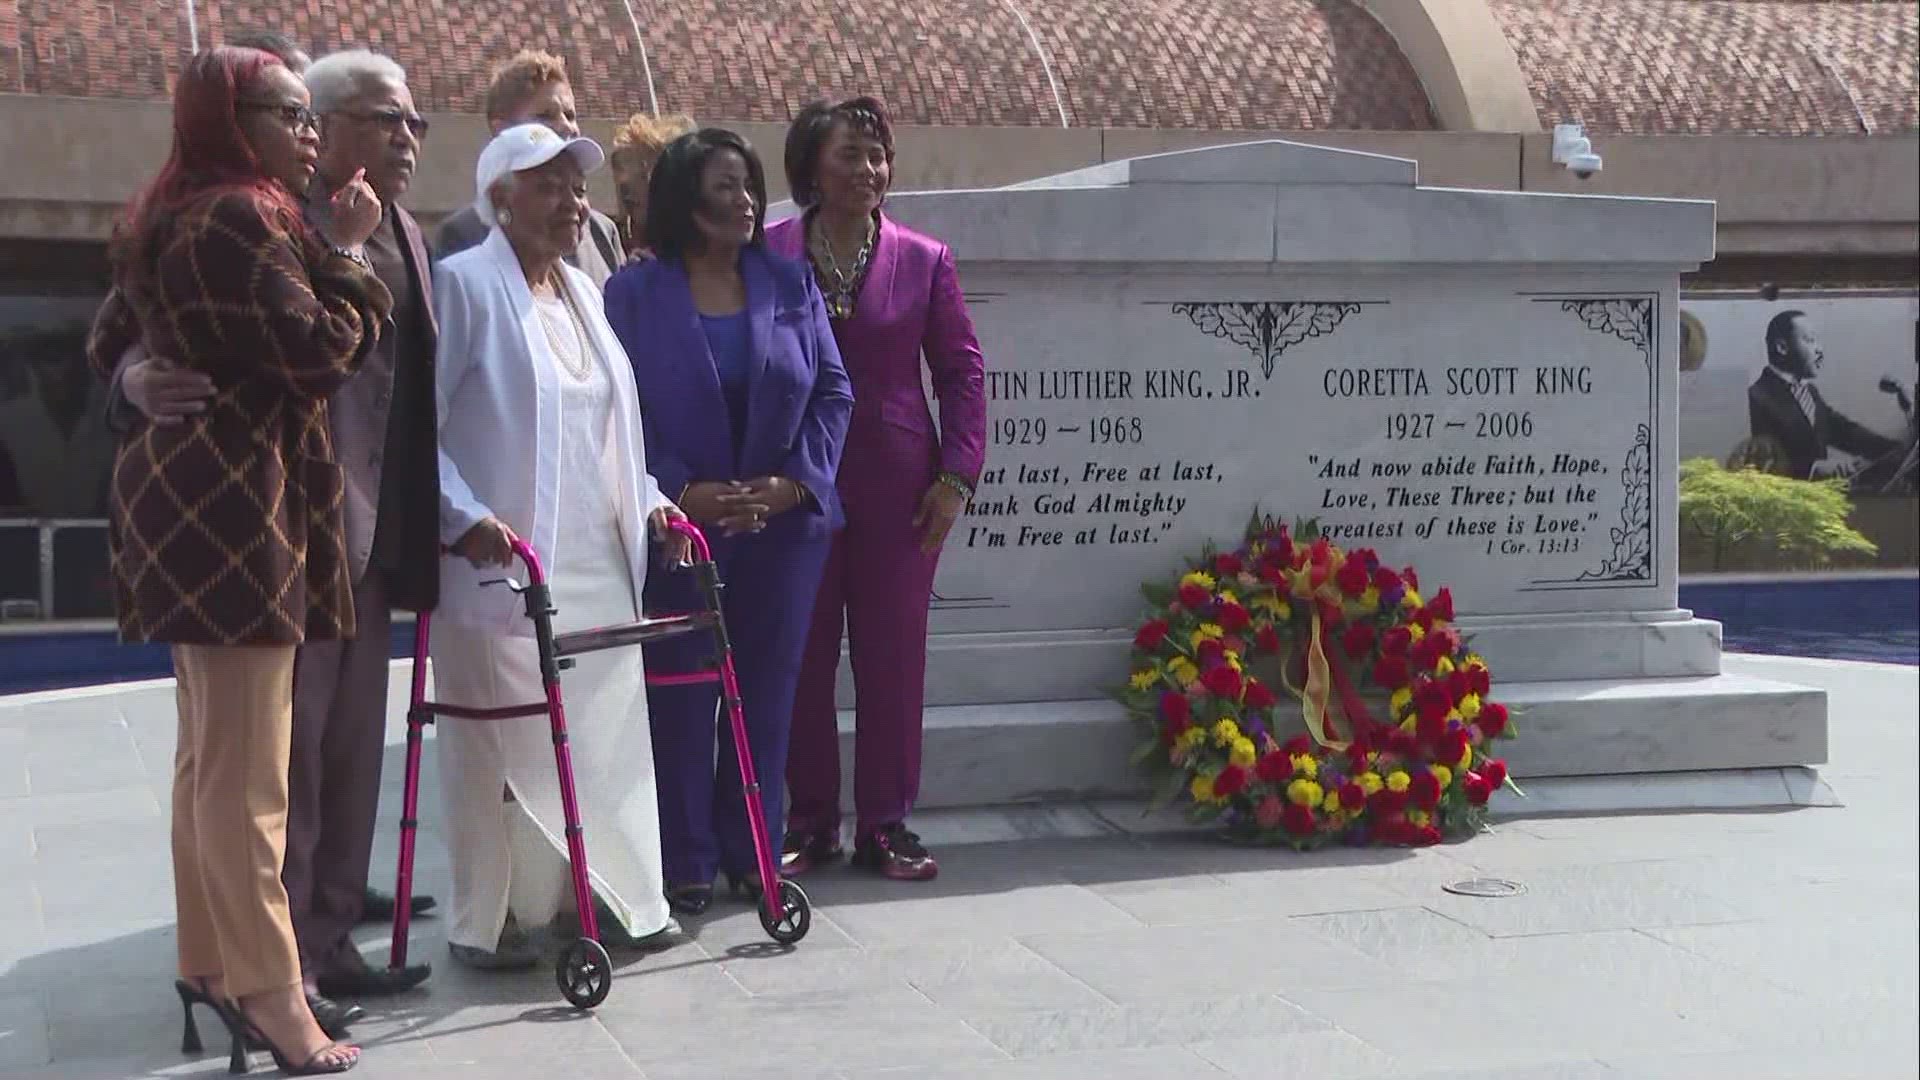 The King Center began the wreath laying ceremony Tuesday at 2:45 p.m. The ceremony was led by the daughter of the late Civil Rights pioneer.